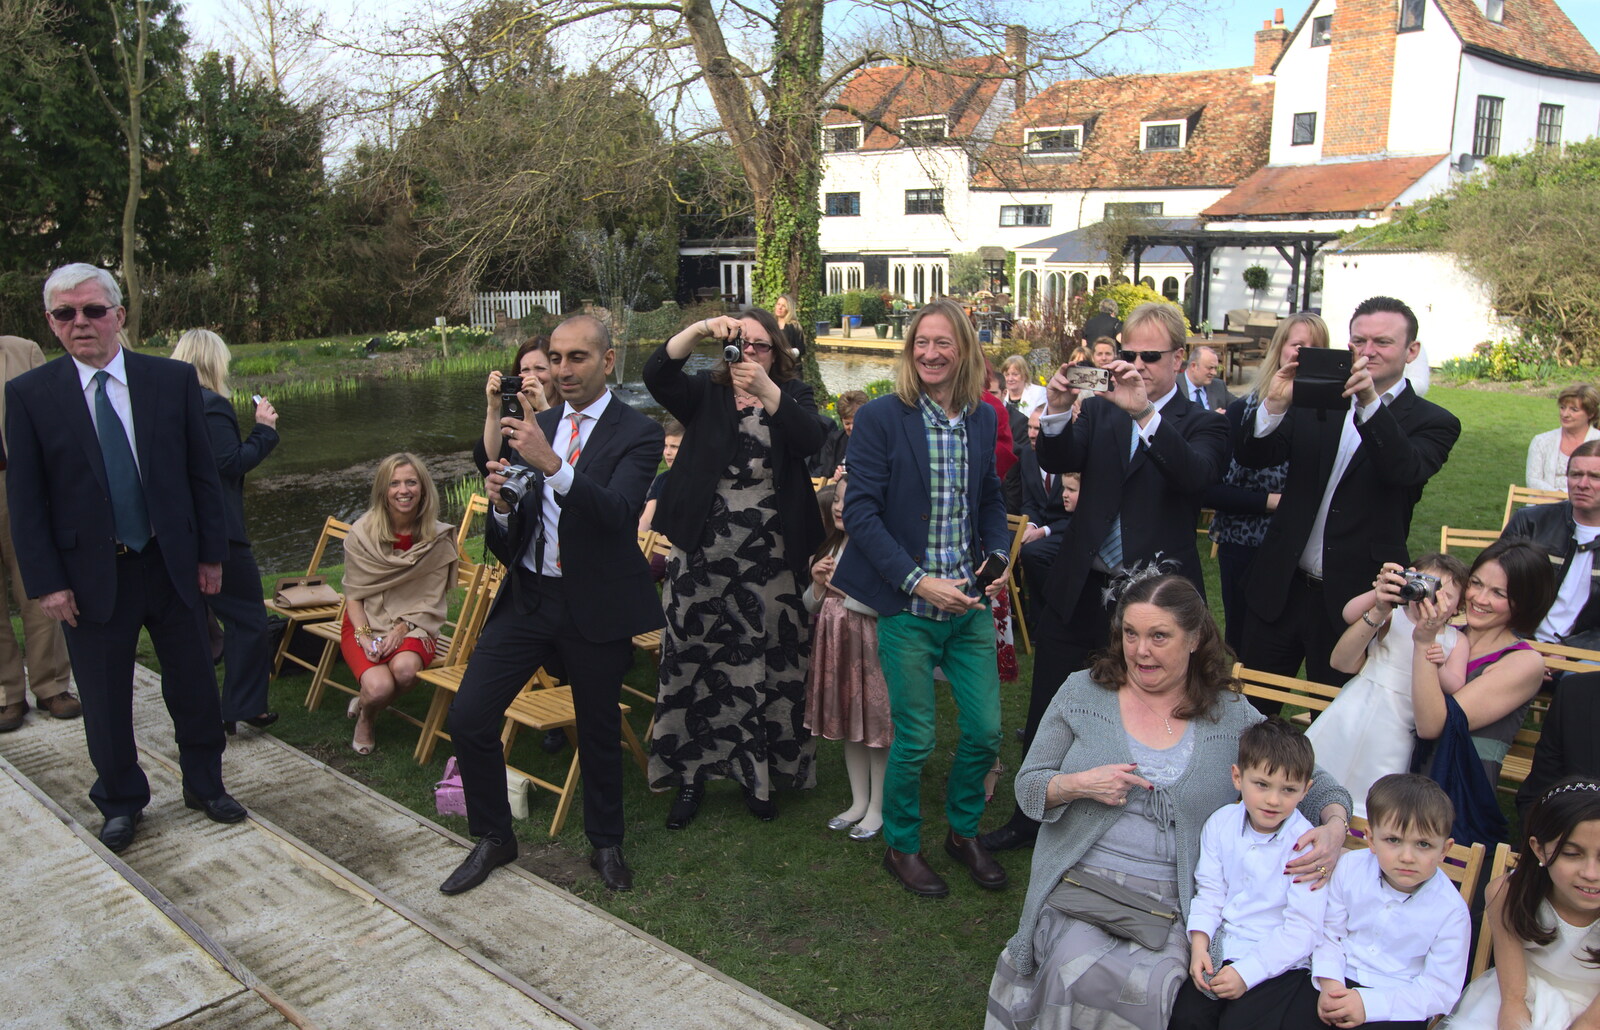 A paparazzi moment from John and Caroline's Wedding, Sheene Mill, Melbourne, Cambridgeshire - 8th March 2014